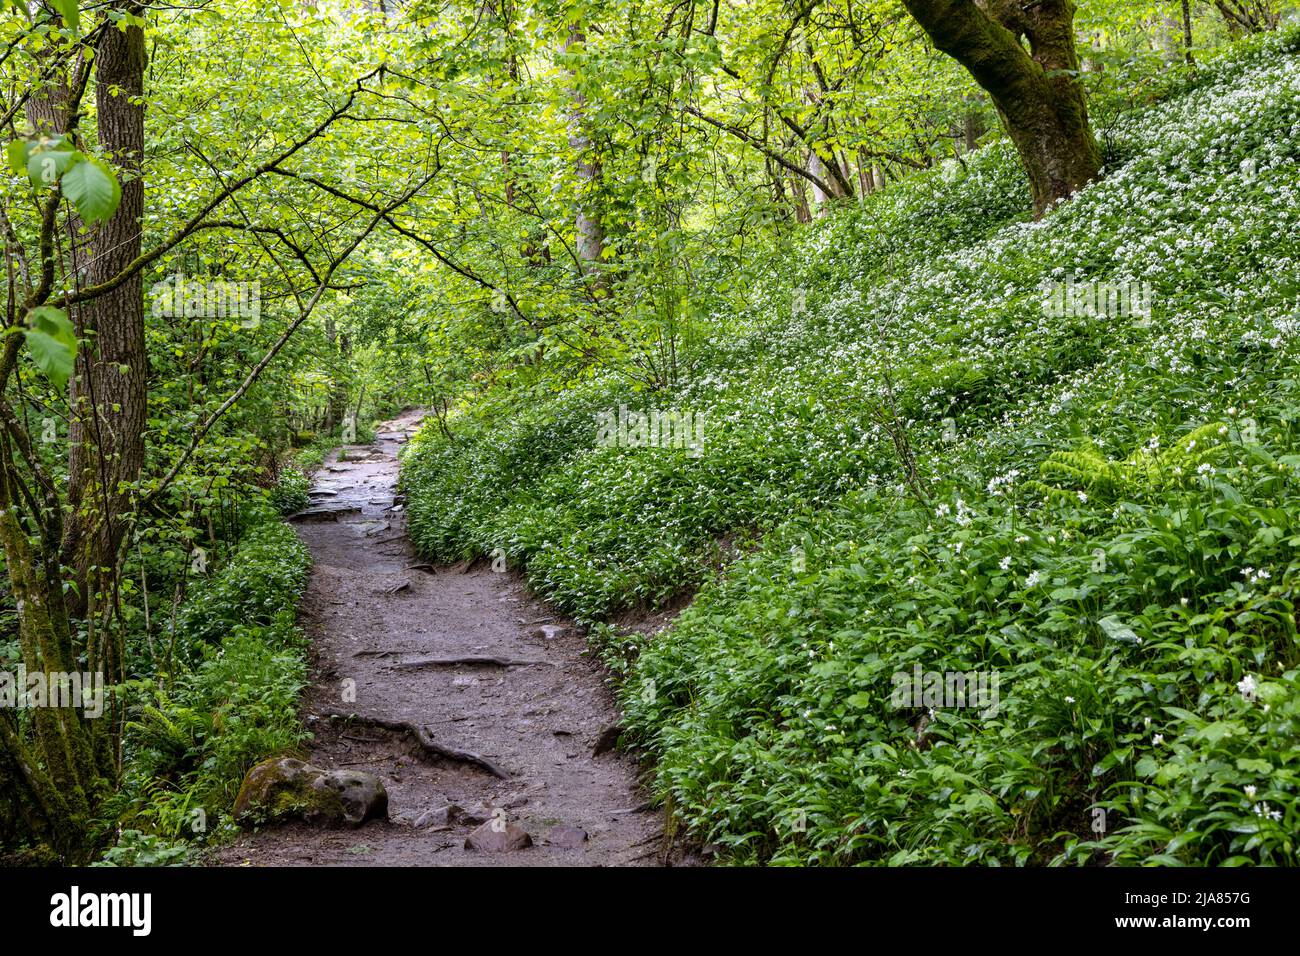 Wild garlic in woodland, captured from a path on the Waterfalls Trail near the village of Ingleton, Yorkshire Dales, England, Uk Stock Photo